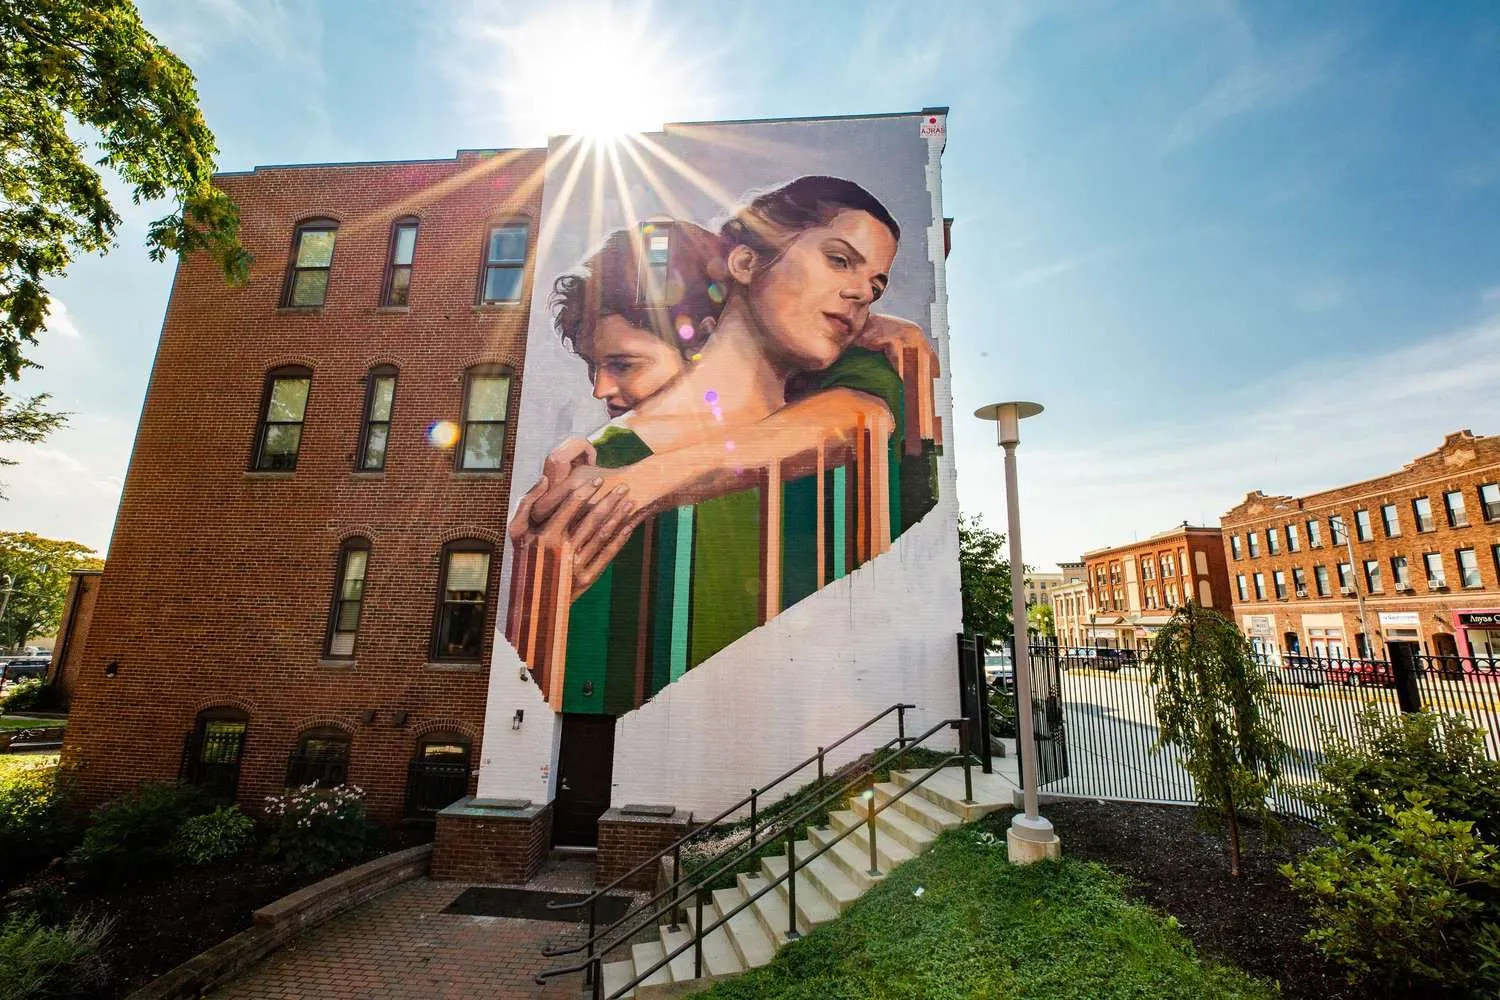 a large mural of a woman holding a child on the side of a building.